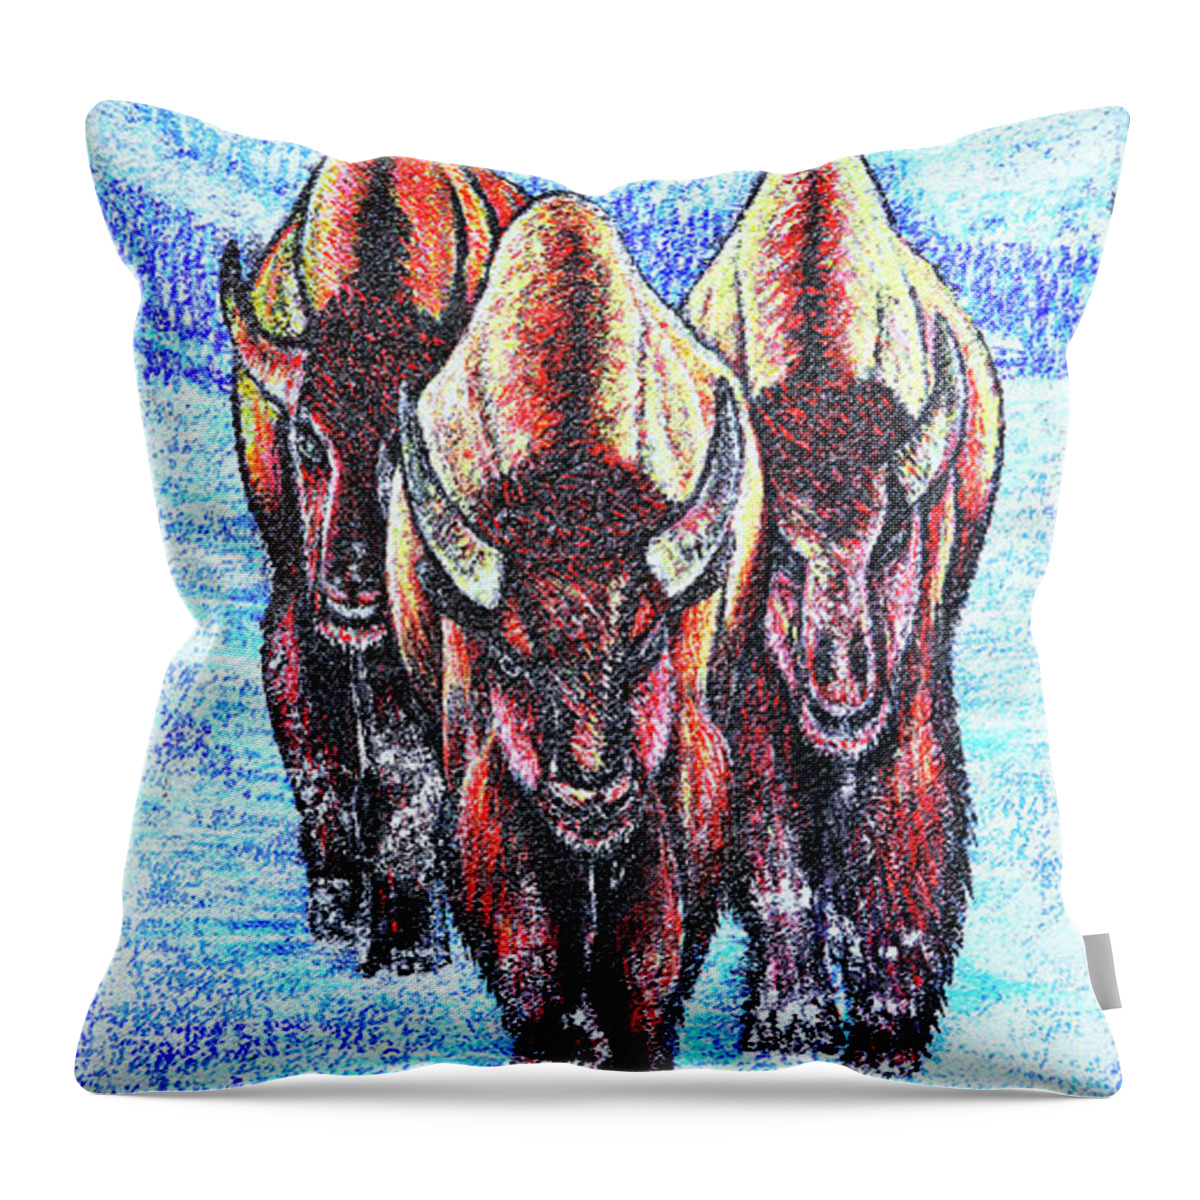 Lanscape Throw Pillow featuring the painting Buffalos by Viktor Lazarev